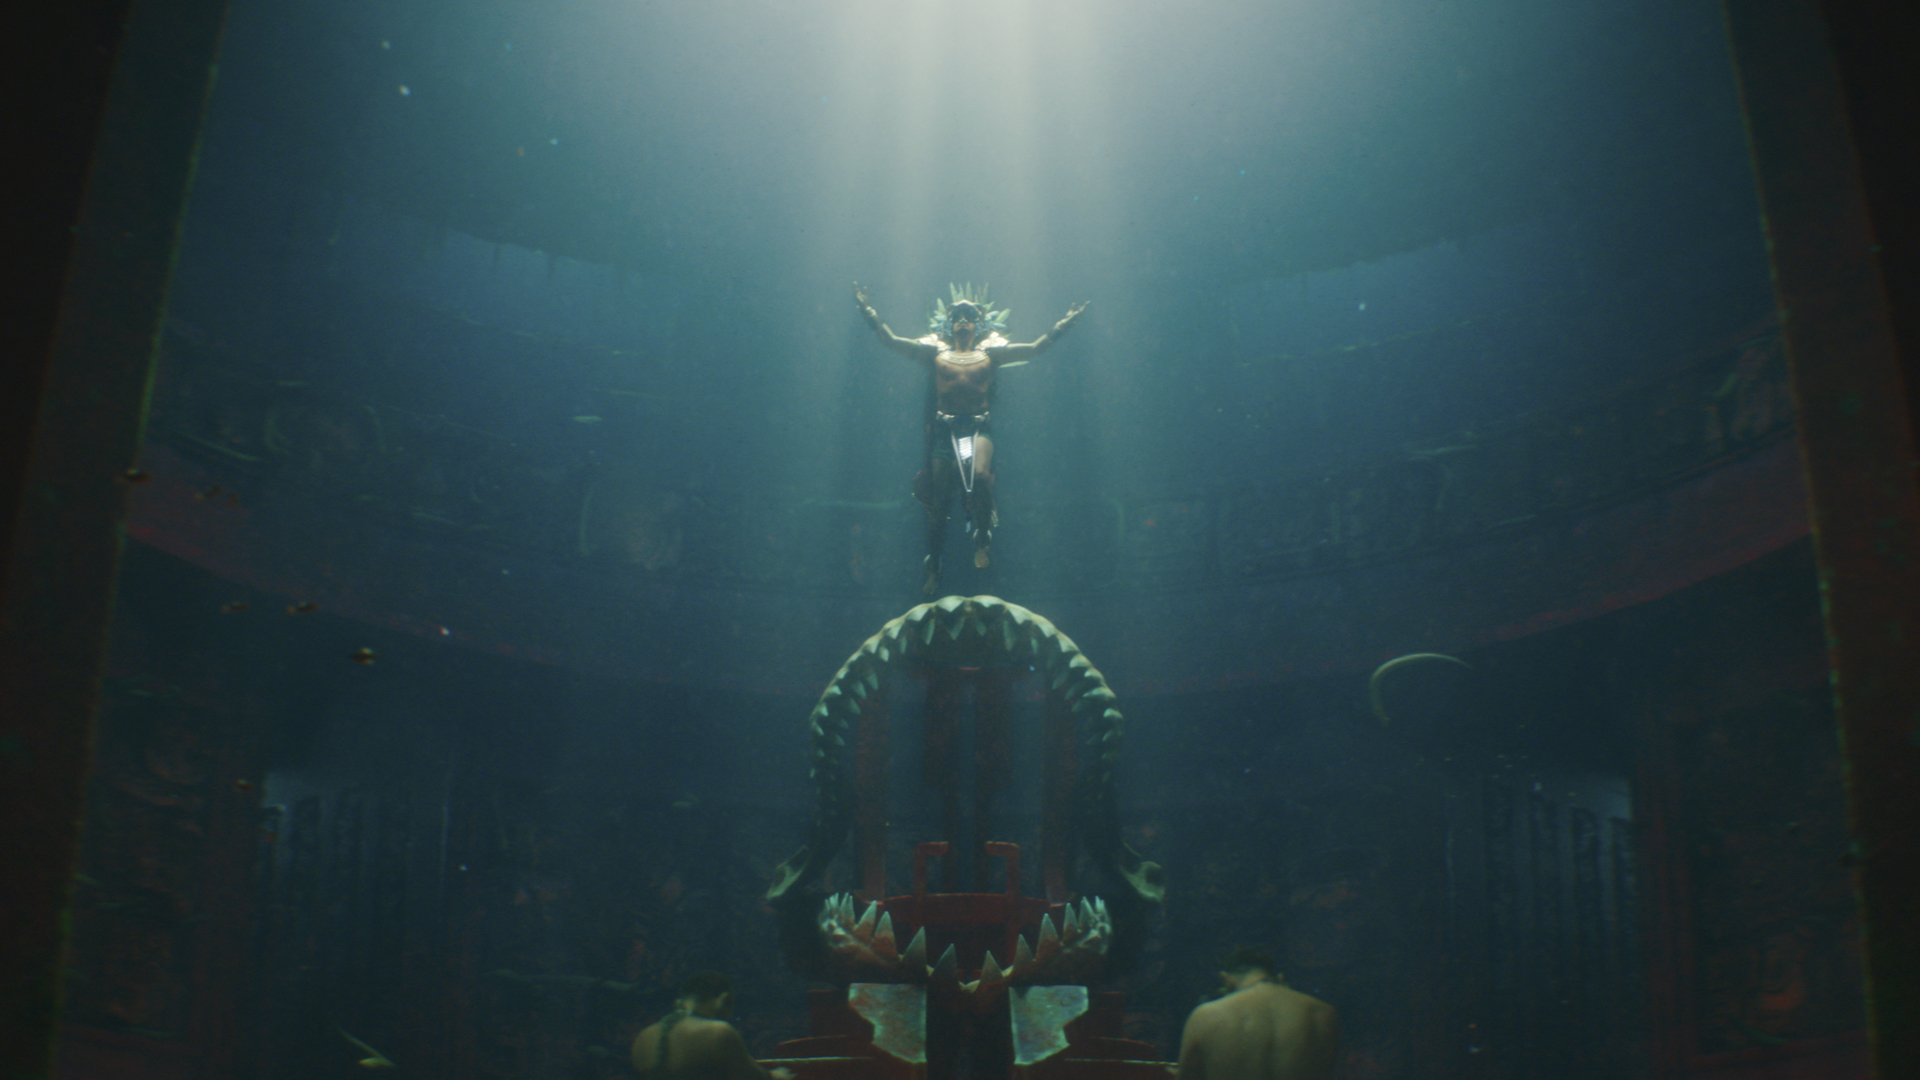 Namor descends to his megalodon throne created in Talokan in Black Panther: Wakanda Forever